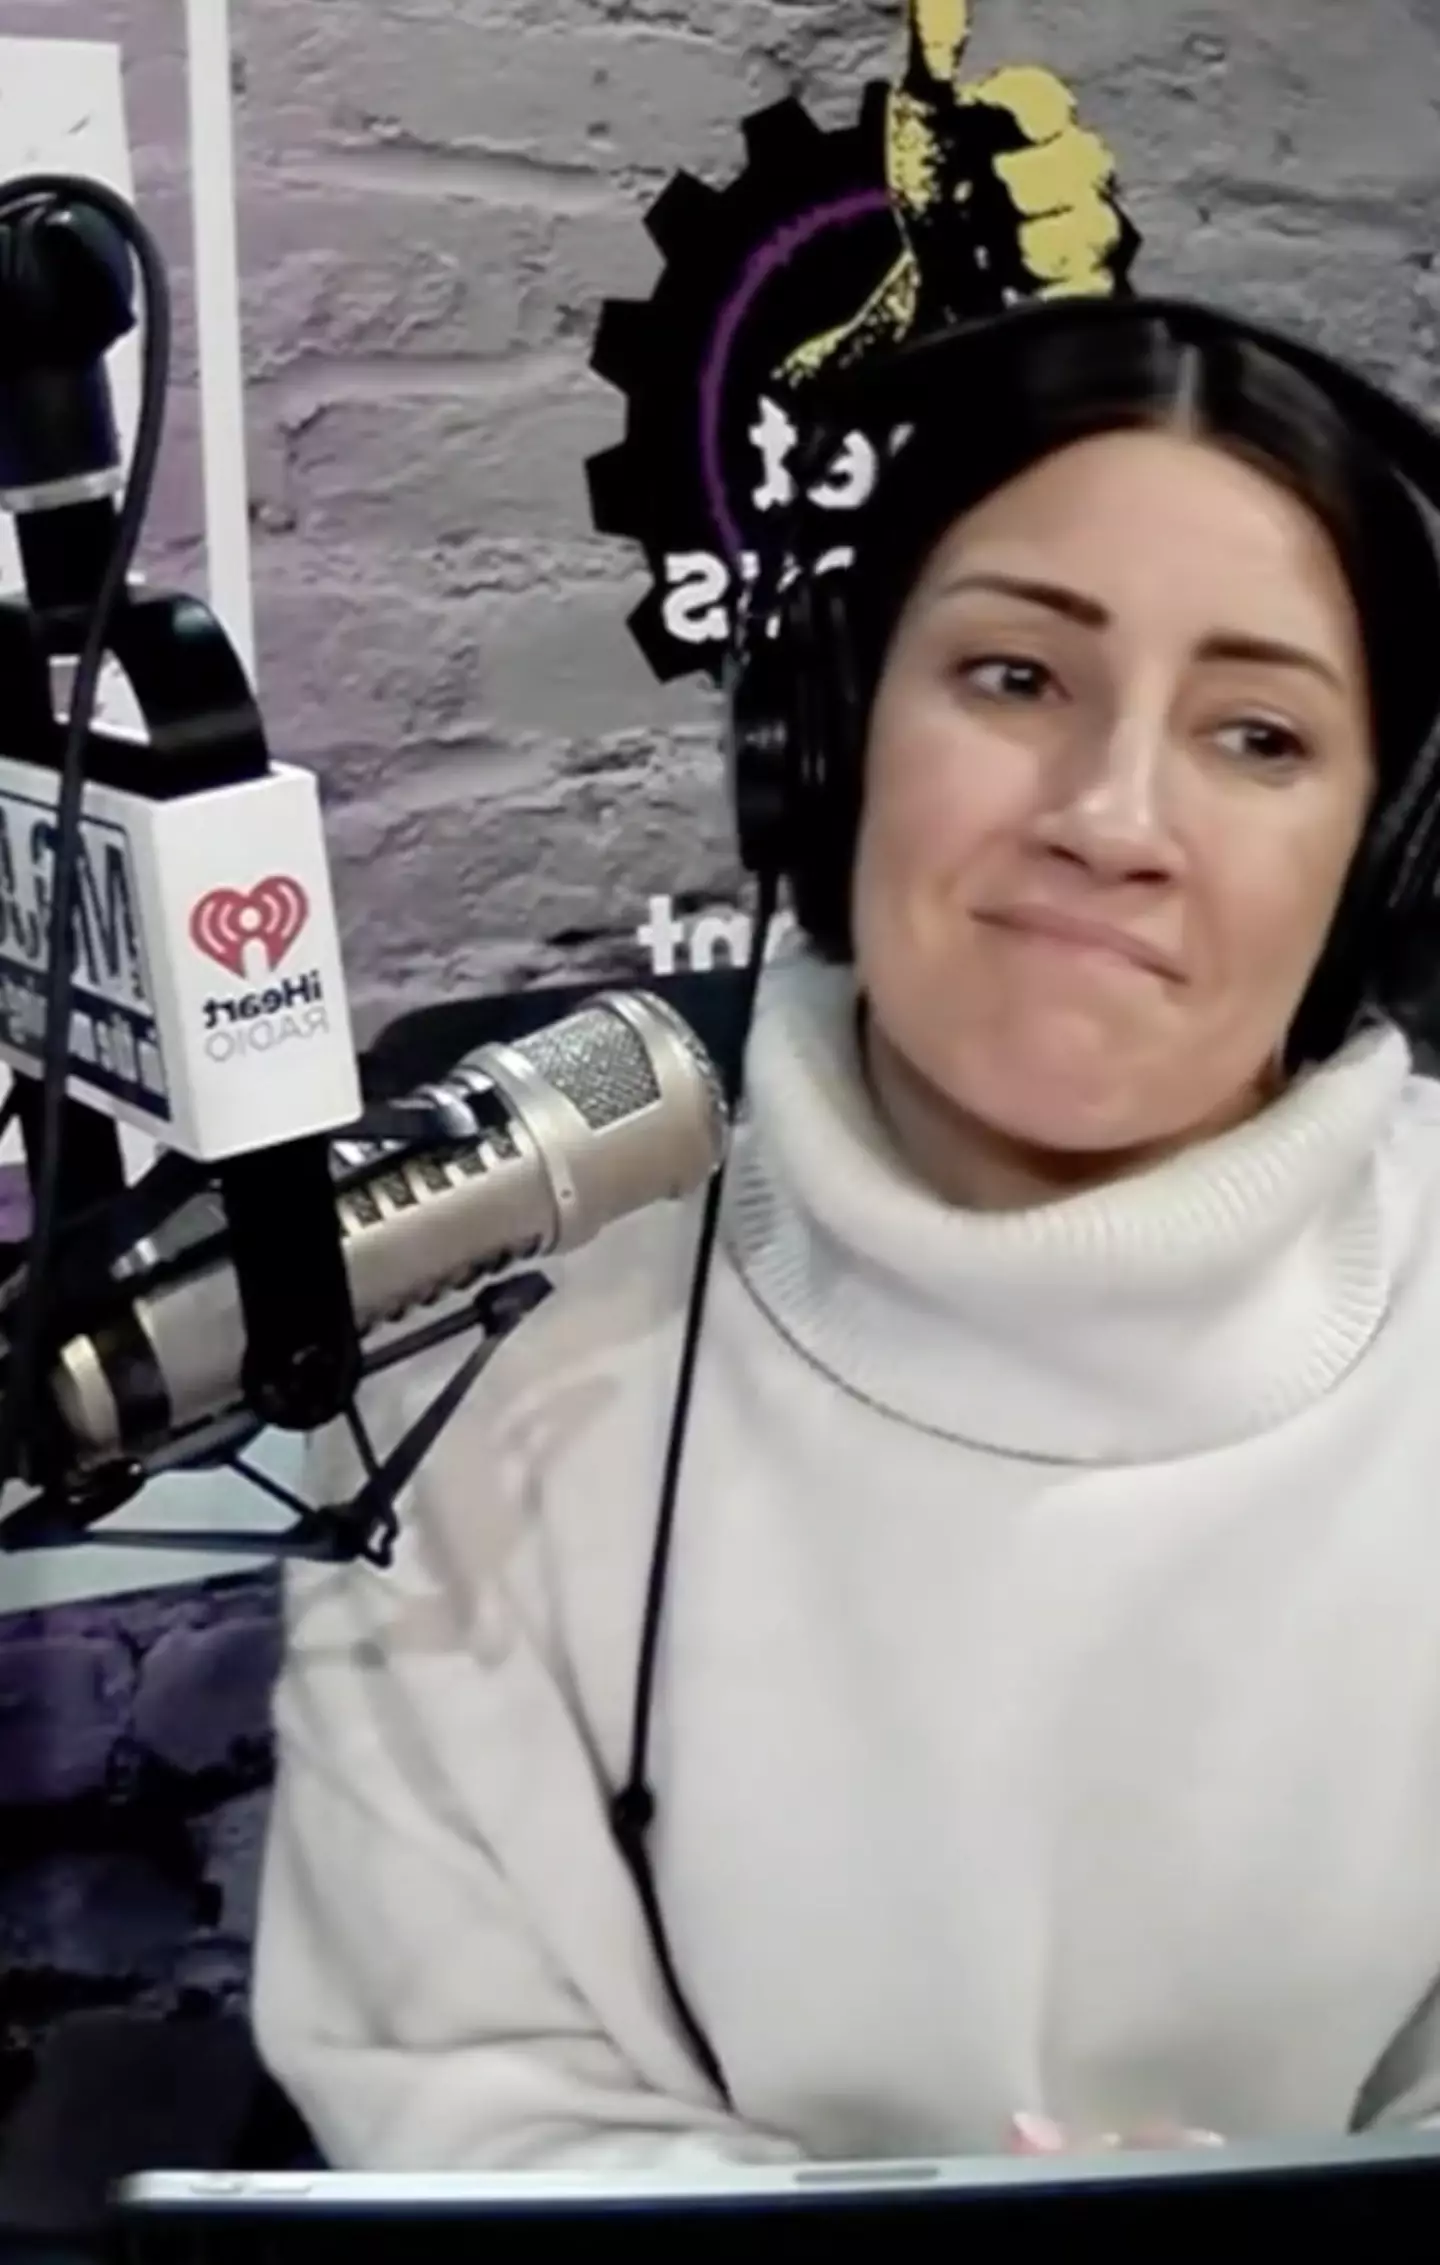 Radio hosts tricked the cheating husband into admitting there's another woman in his life.